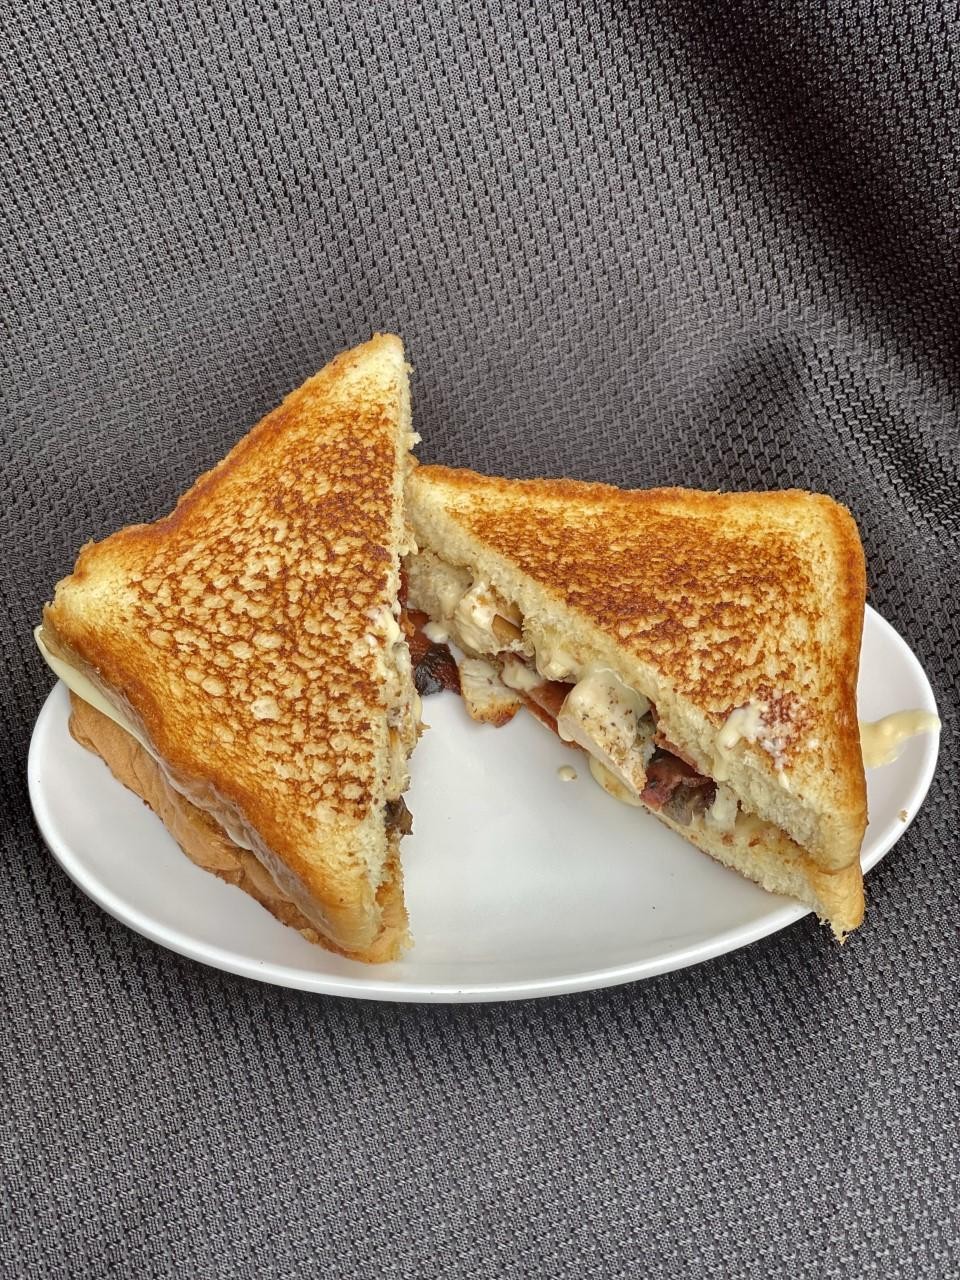 Luci's Grilled Cheese Deluxe